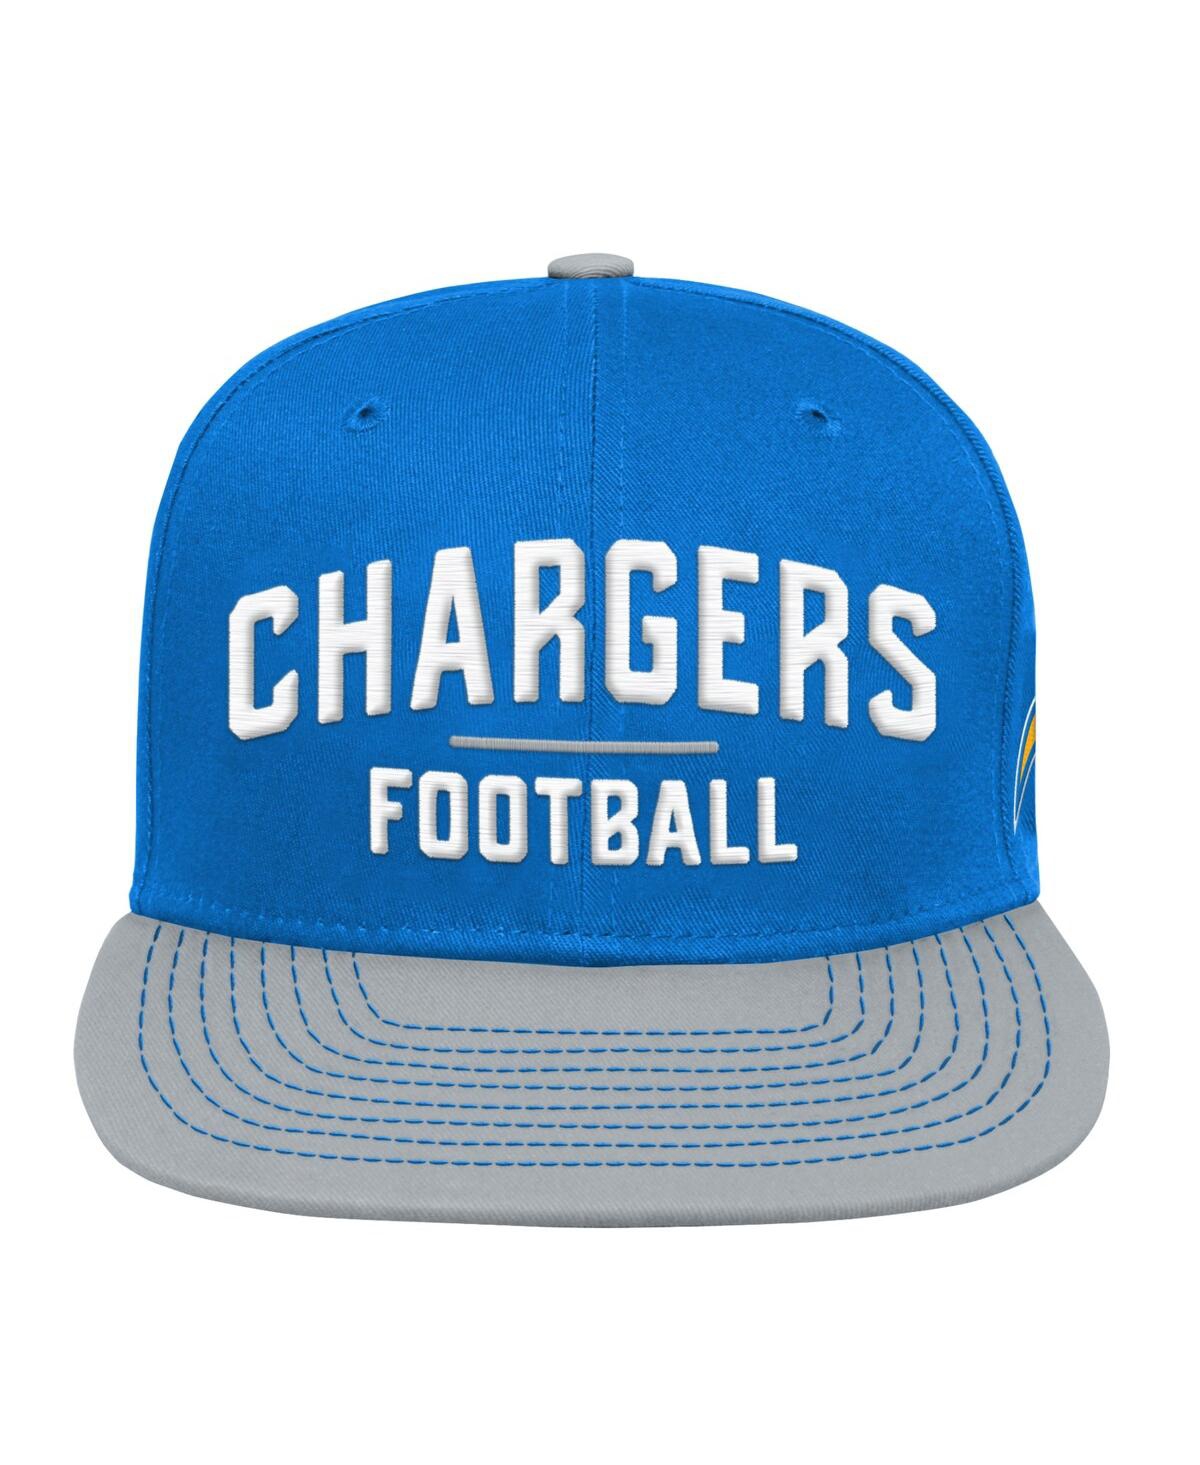 Shop Outerstuff Preschool Boys And Girls Powder Blue Los Angeles Chargers Lock Up Snapback Hat